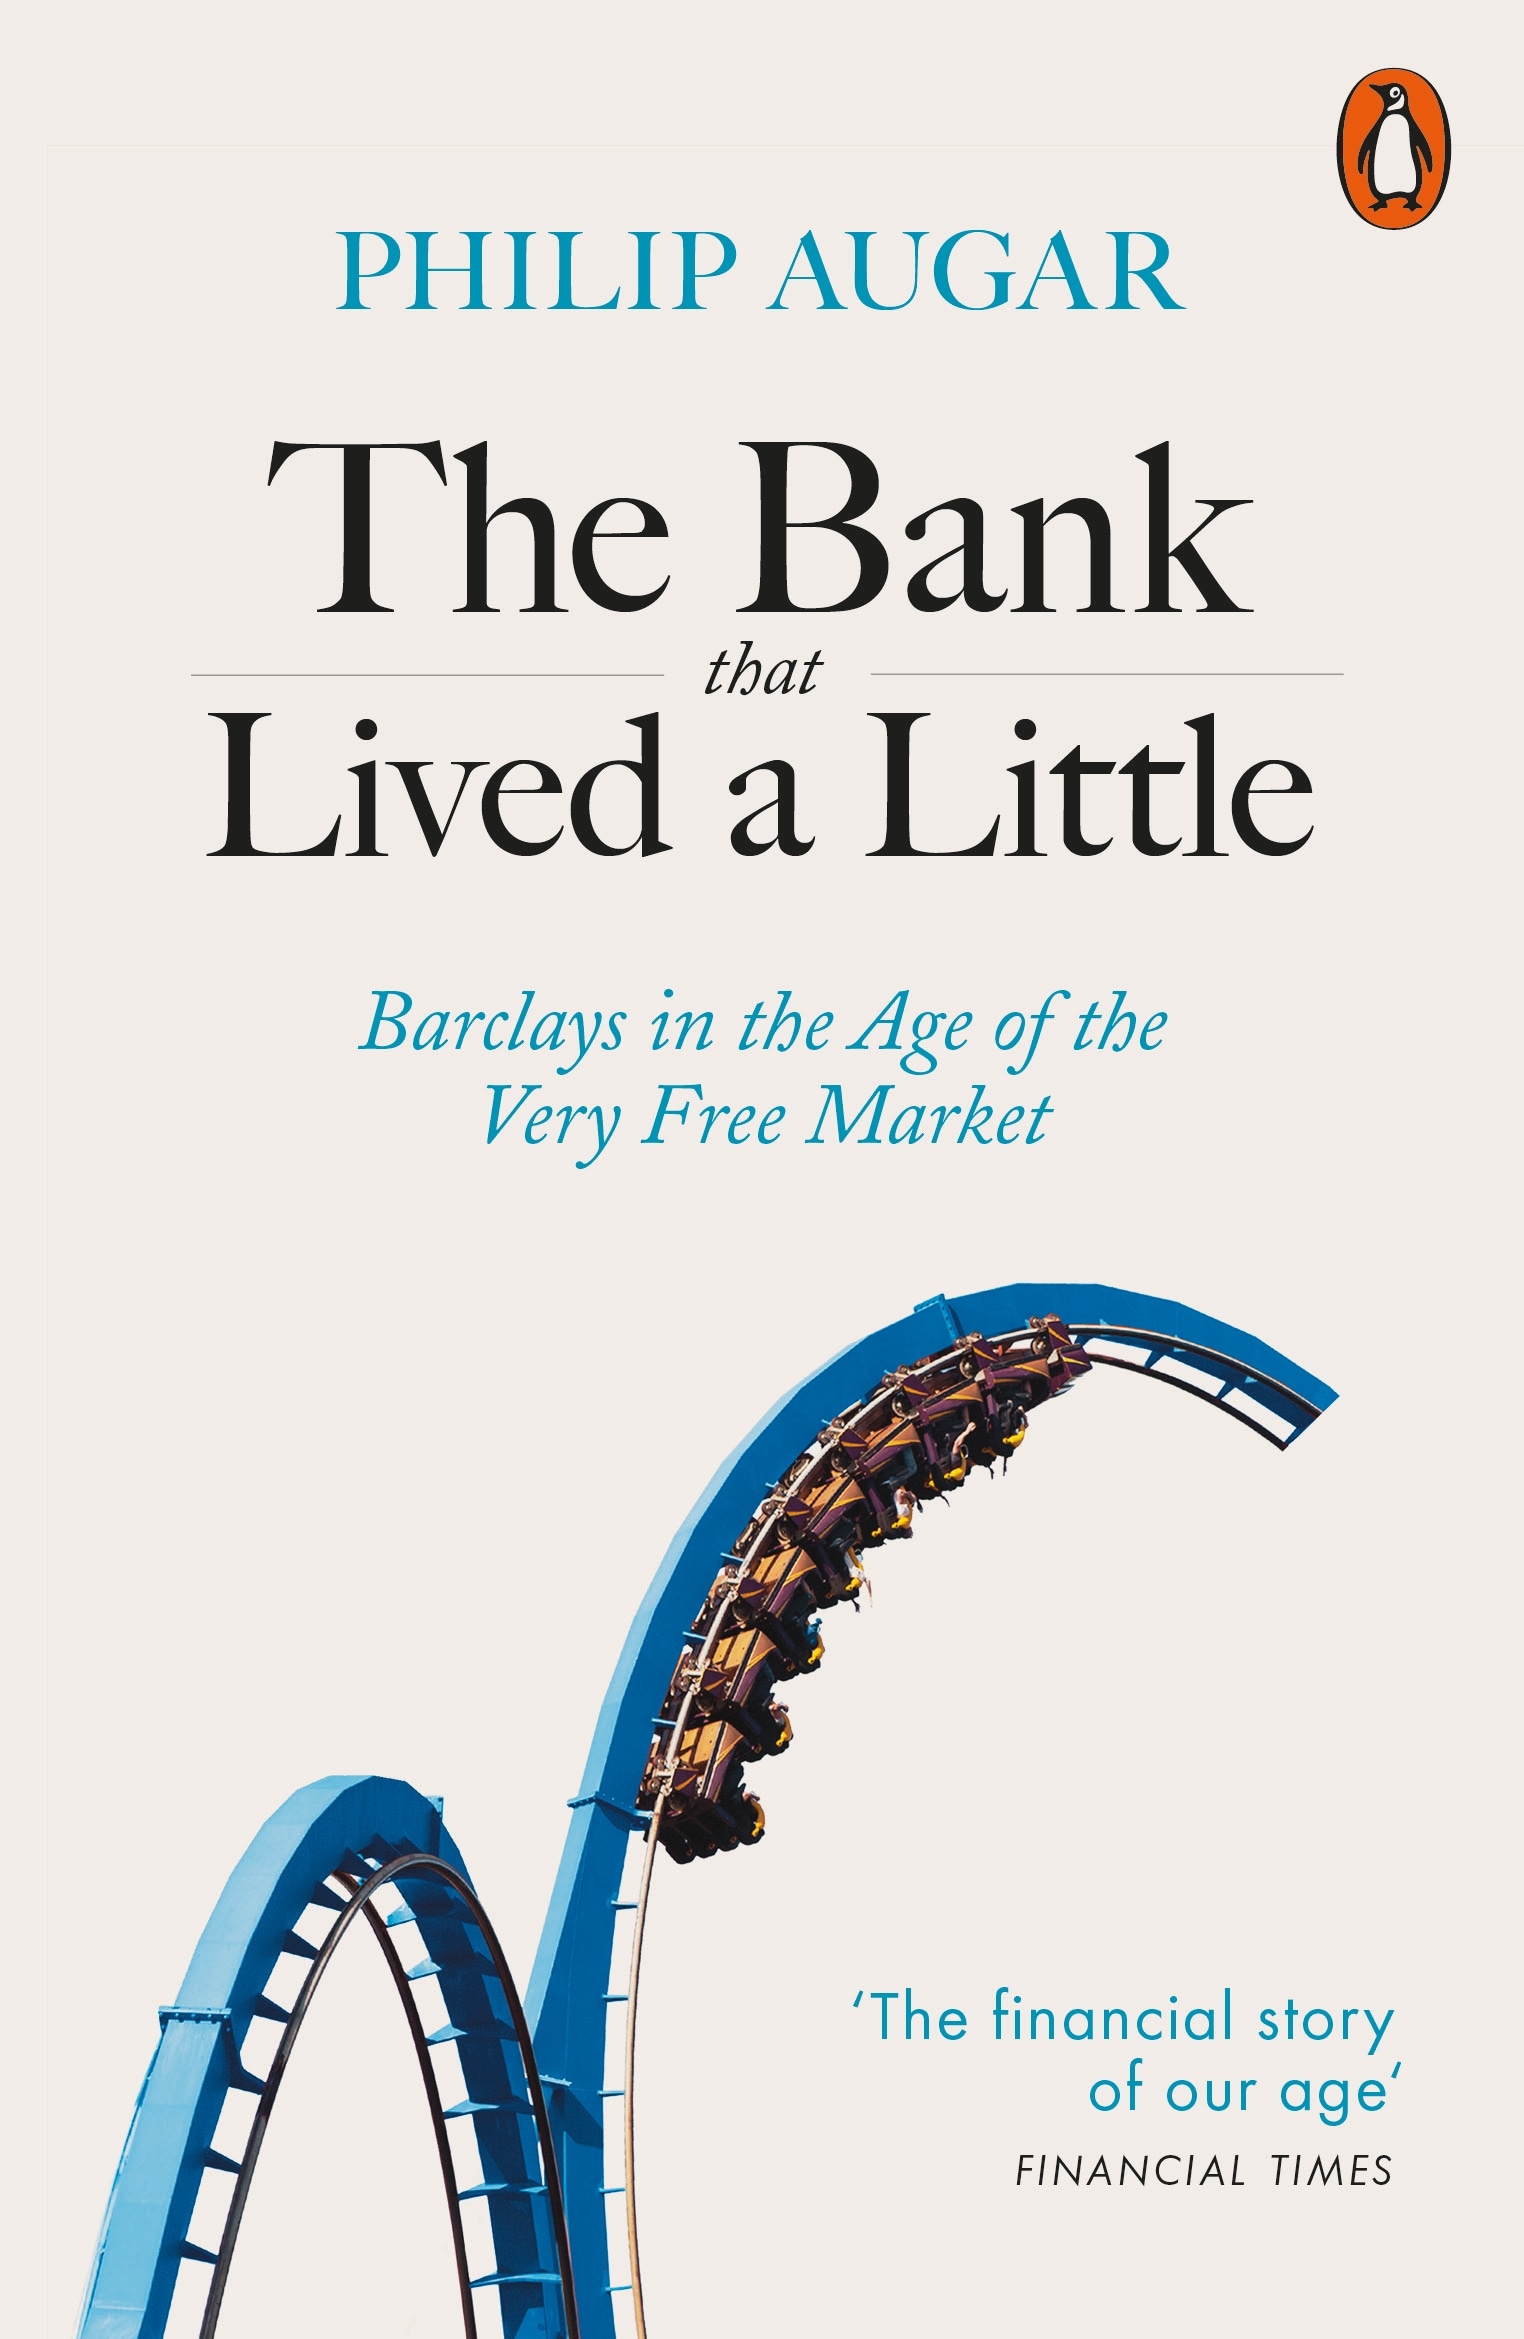 Book “The Bank That Lived a Little” by Philip Augar — September 5, 2019